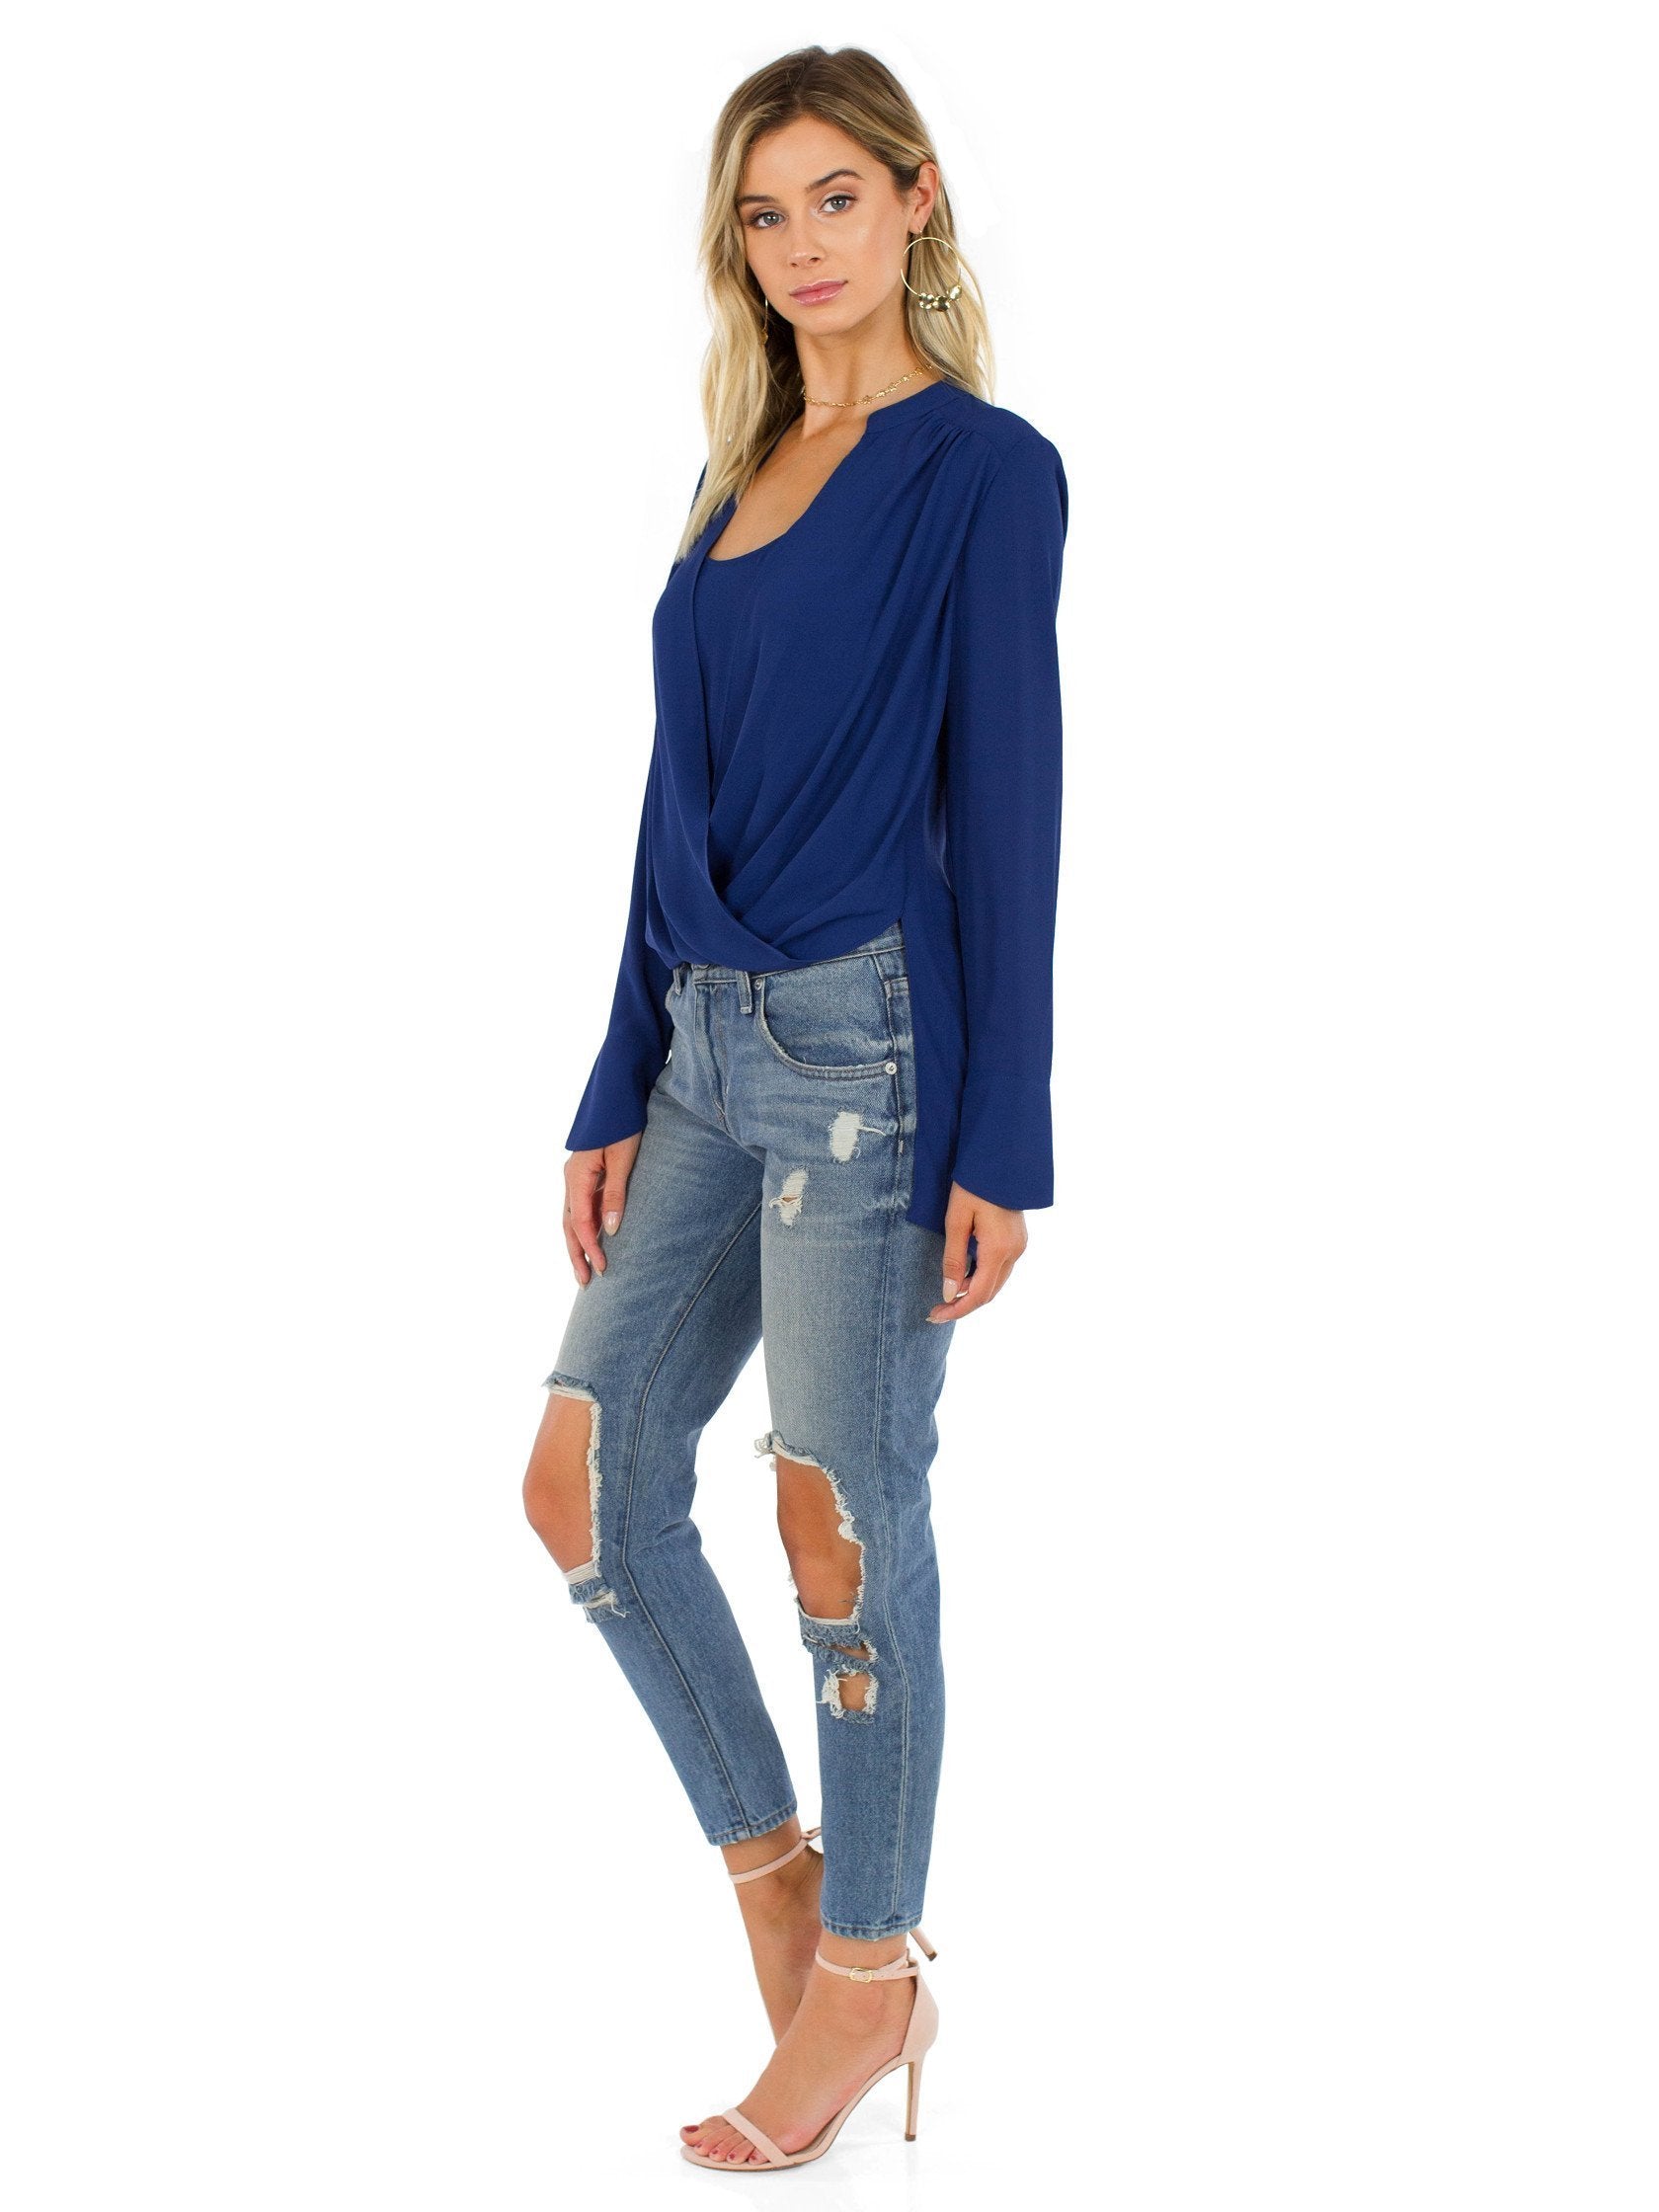 Women wearing a top rental from BCBGMAXAZRIA called Jaklyn Draped-front Blouse